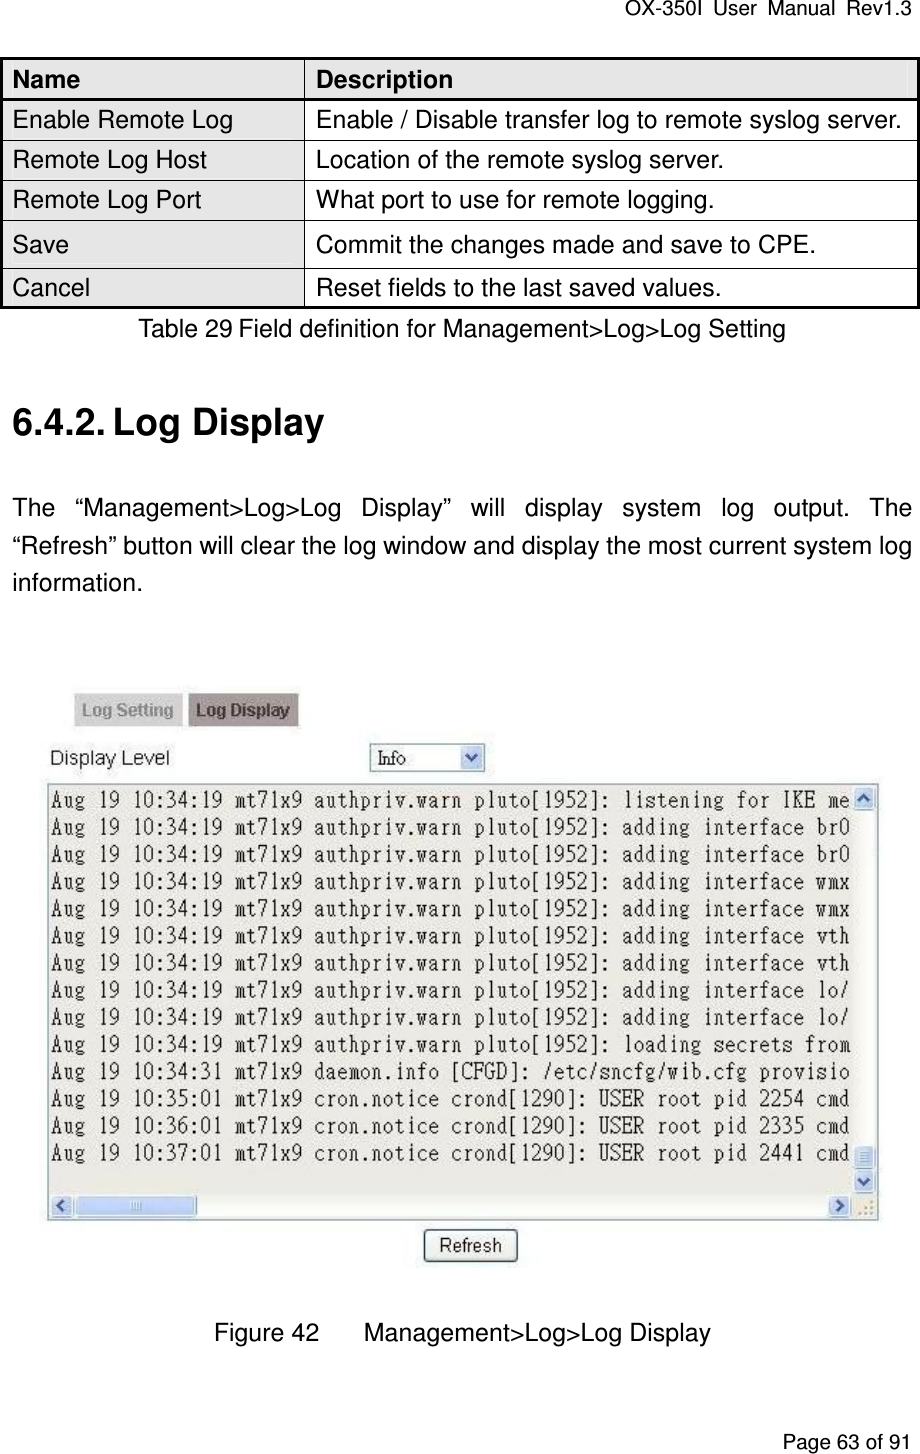 OX-350I  User  Manual  Rev1.3 Page 63 of 91 Name  Description Enable Remote Log  Enable / Disable transfer log to remote syslog server. Remote Log Host  Location of the remote syslog server. Remote Log Port  What port to use for remote logging. Save  Commit the changes made and save to CPE. Cancel  Reset fields to the last saved values. Table 29 Field definition for Management&gt;Log&gt;Log Setting 6.4.2. Log Display The  “Management&gt;Log&gt;Log  Display”  will  display  system  log  output.  The “Refresh” button will clear the log window and display the most current system log information.   Figure 42  Management&gt;Log&gt;Log Display 